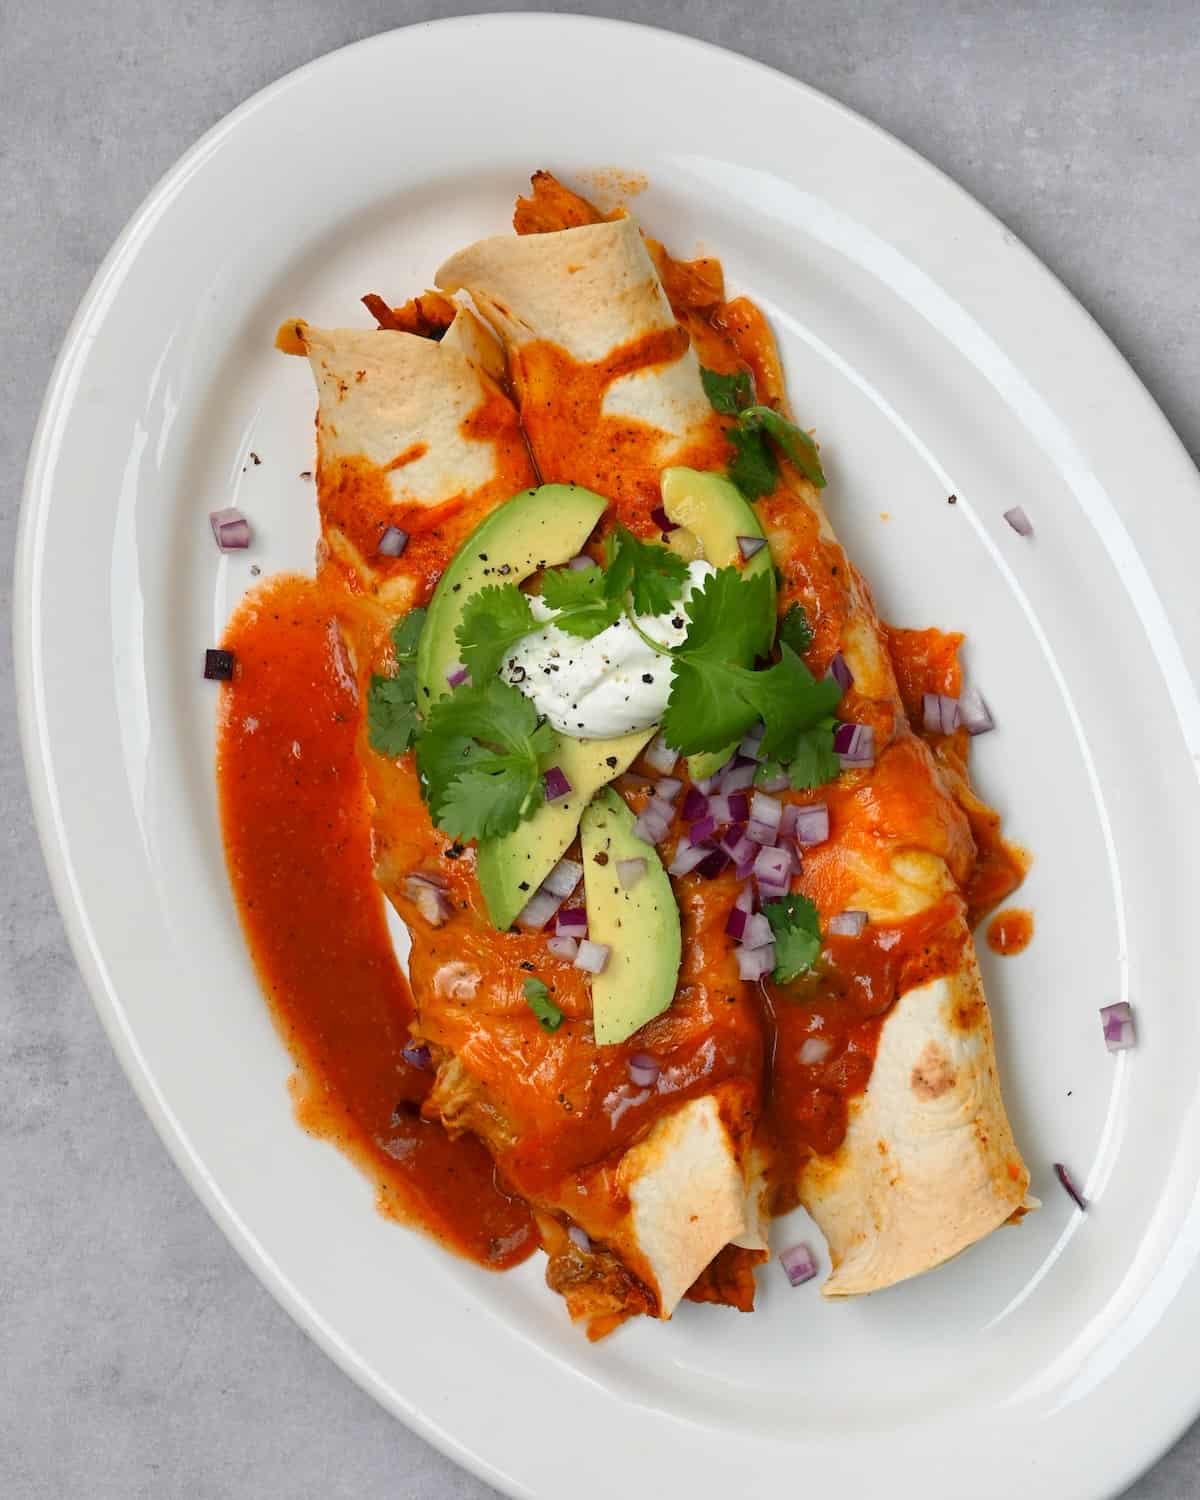 A serving of chicken enchilada topped with avocado